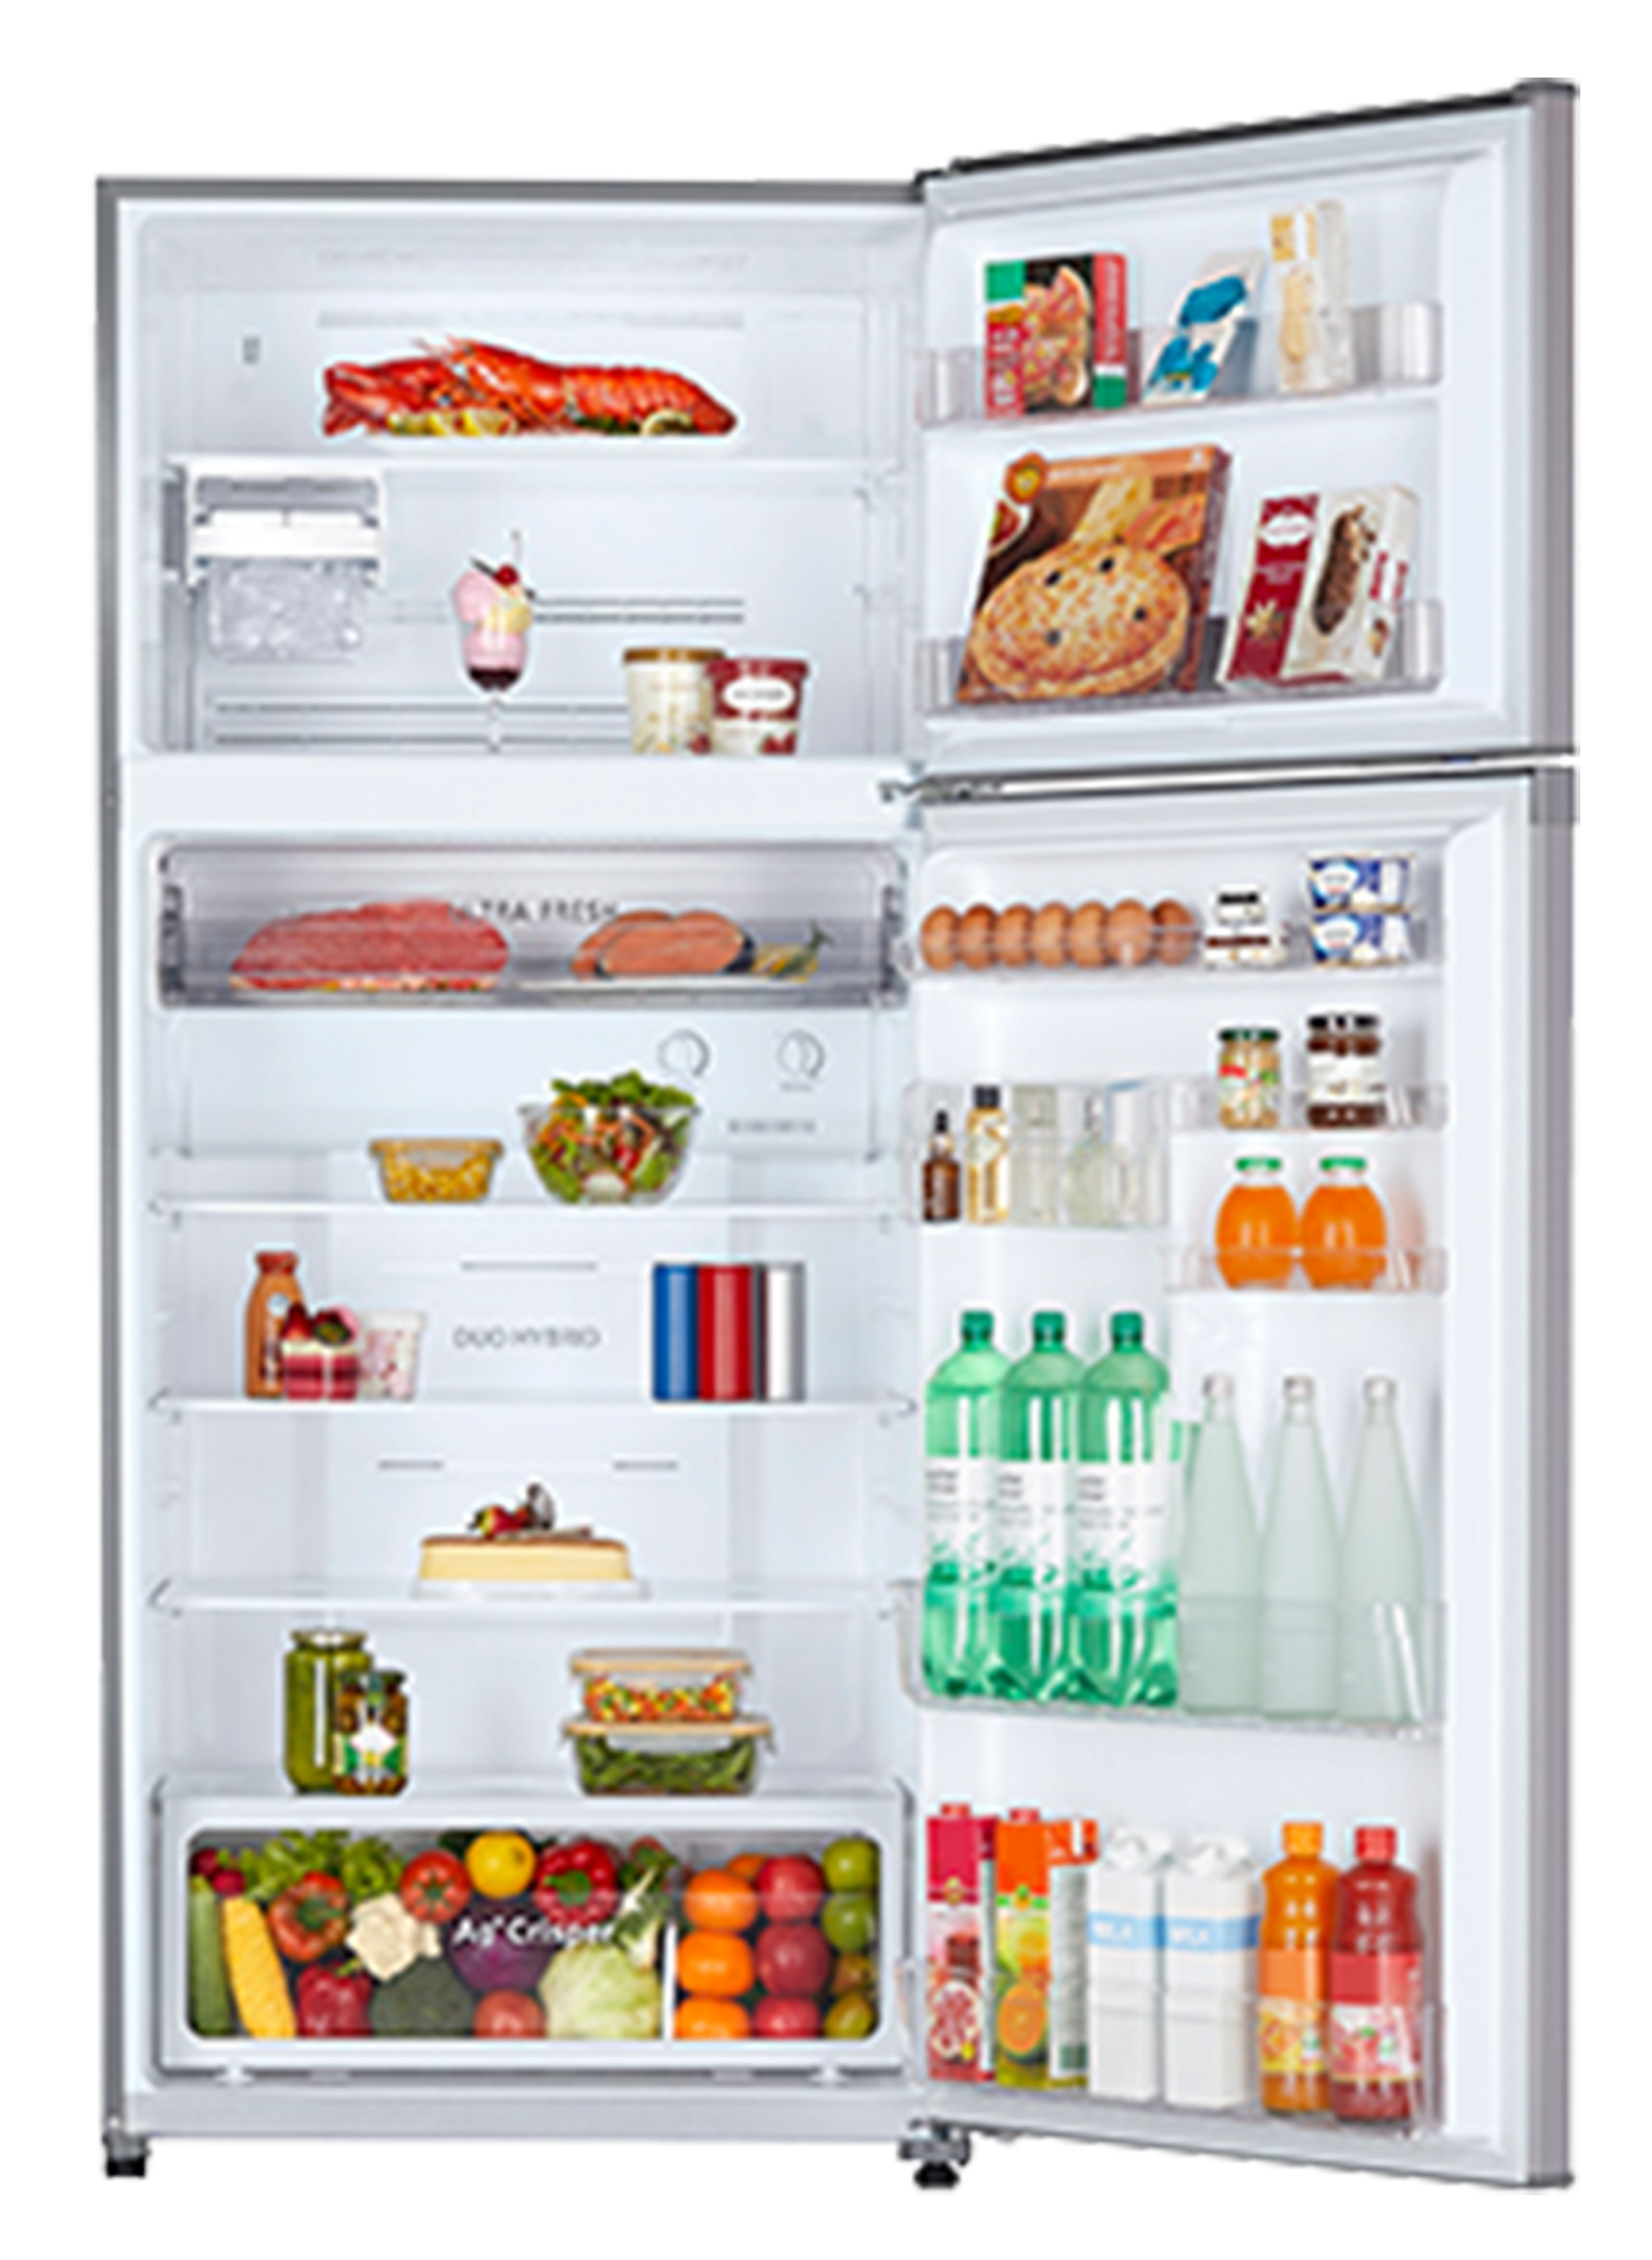 Refrigerator 554L Open With Food